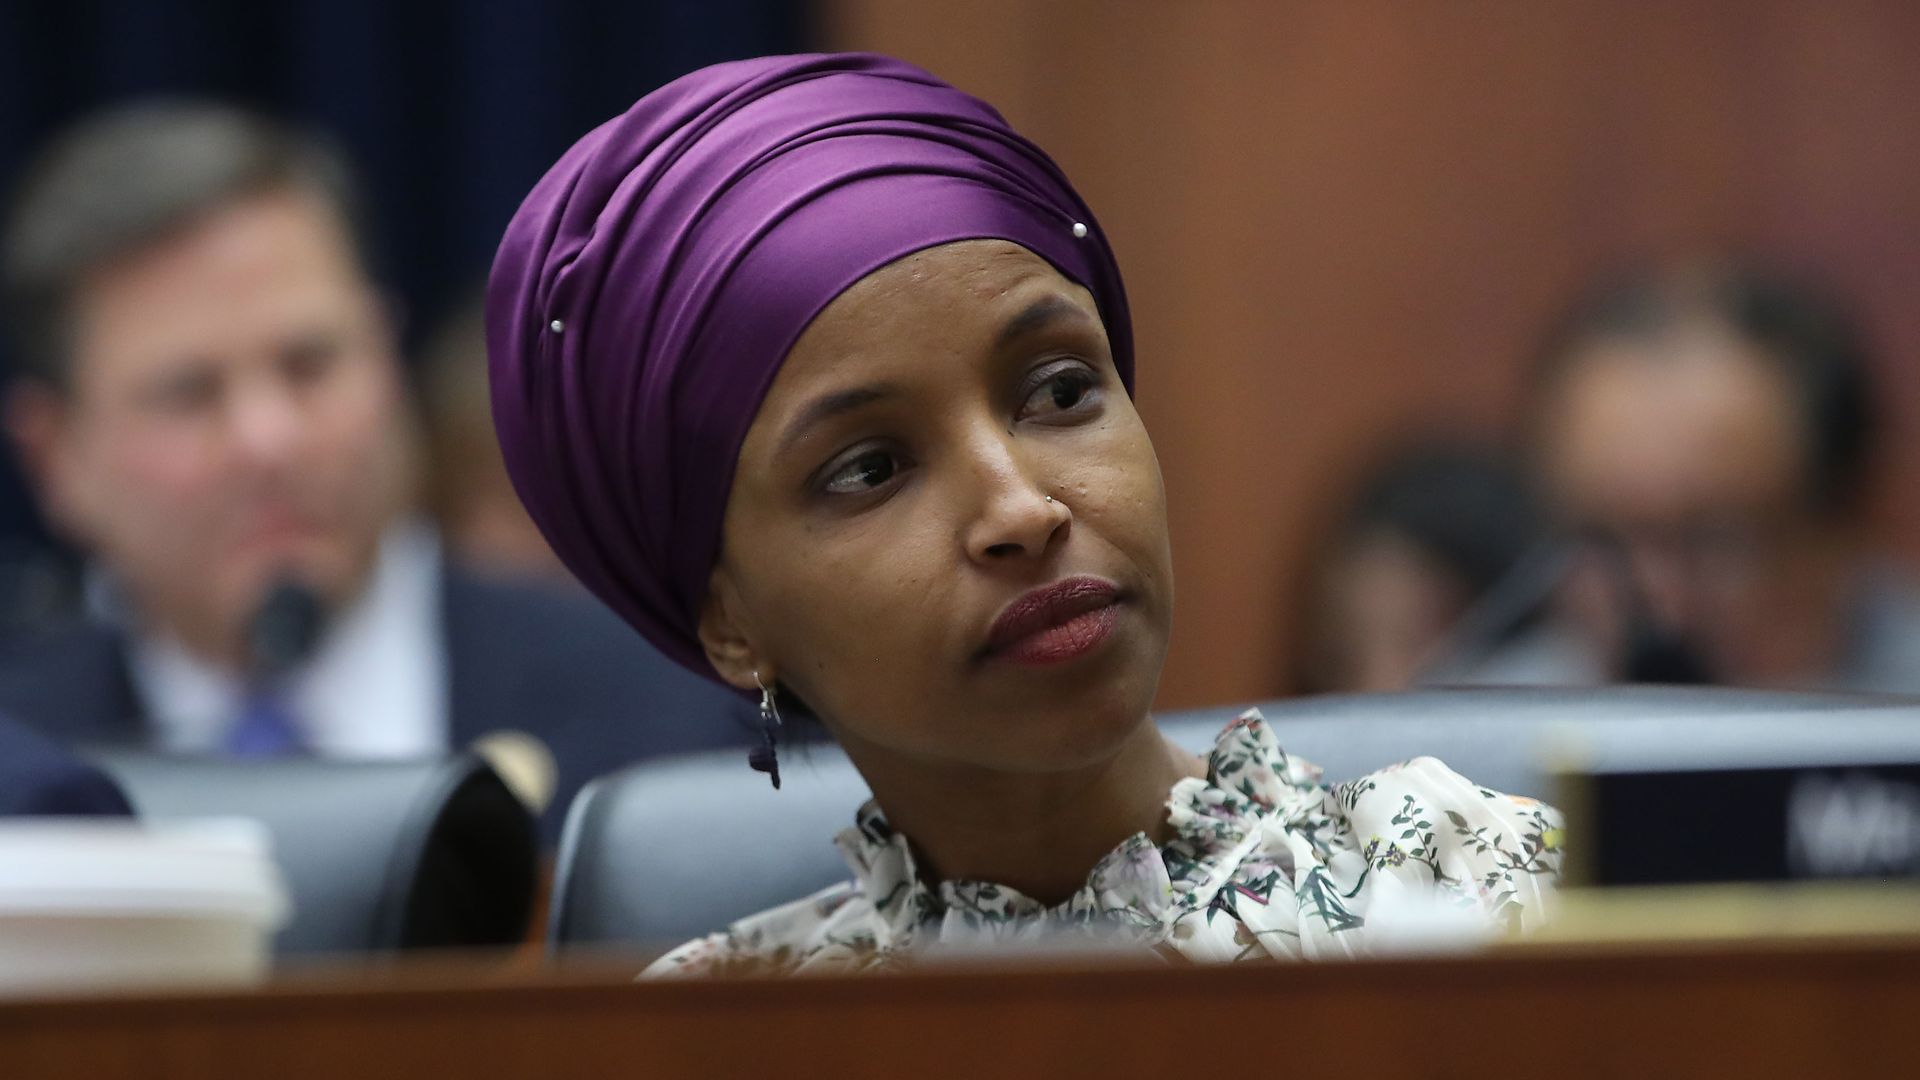 In this image, Ilhan Omar sits behind a placard with her name on it. 